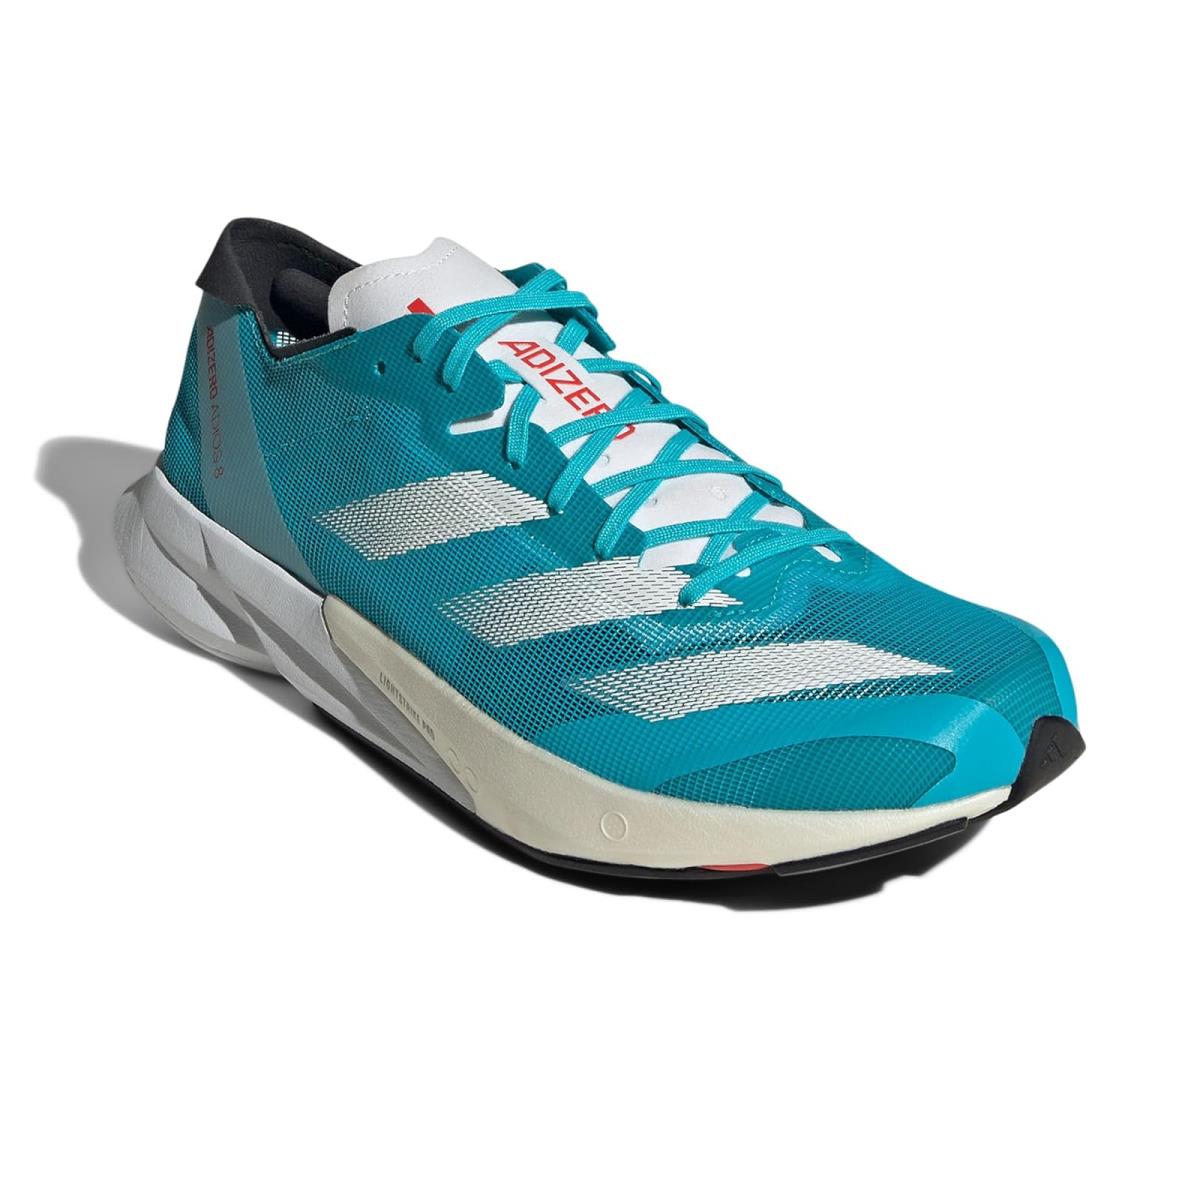 Man`s Sneakers Athletic Shoes Adidas Running Adizero Adios 8 Lucid Cyan/White/Bright Red